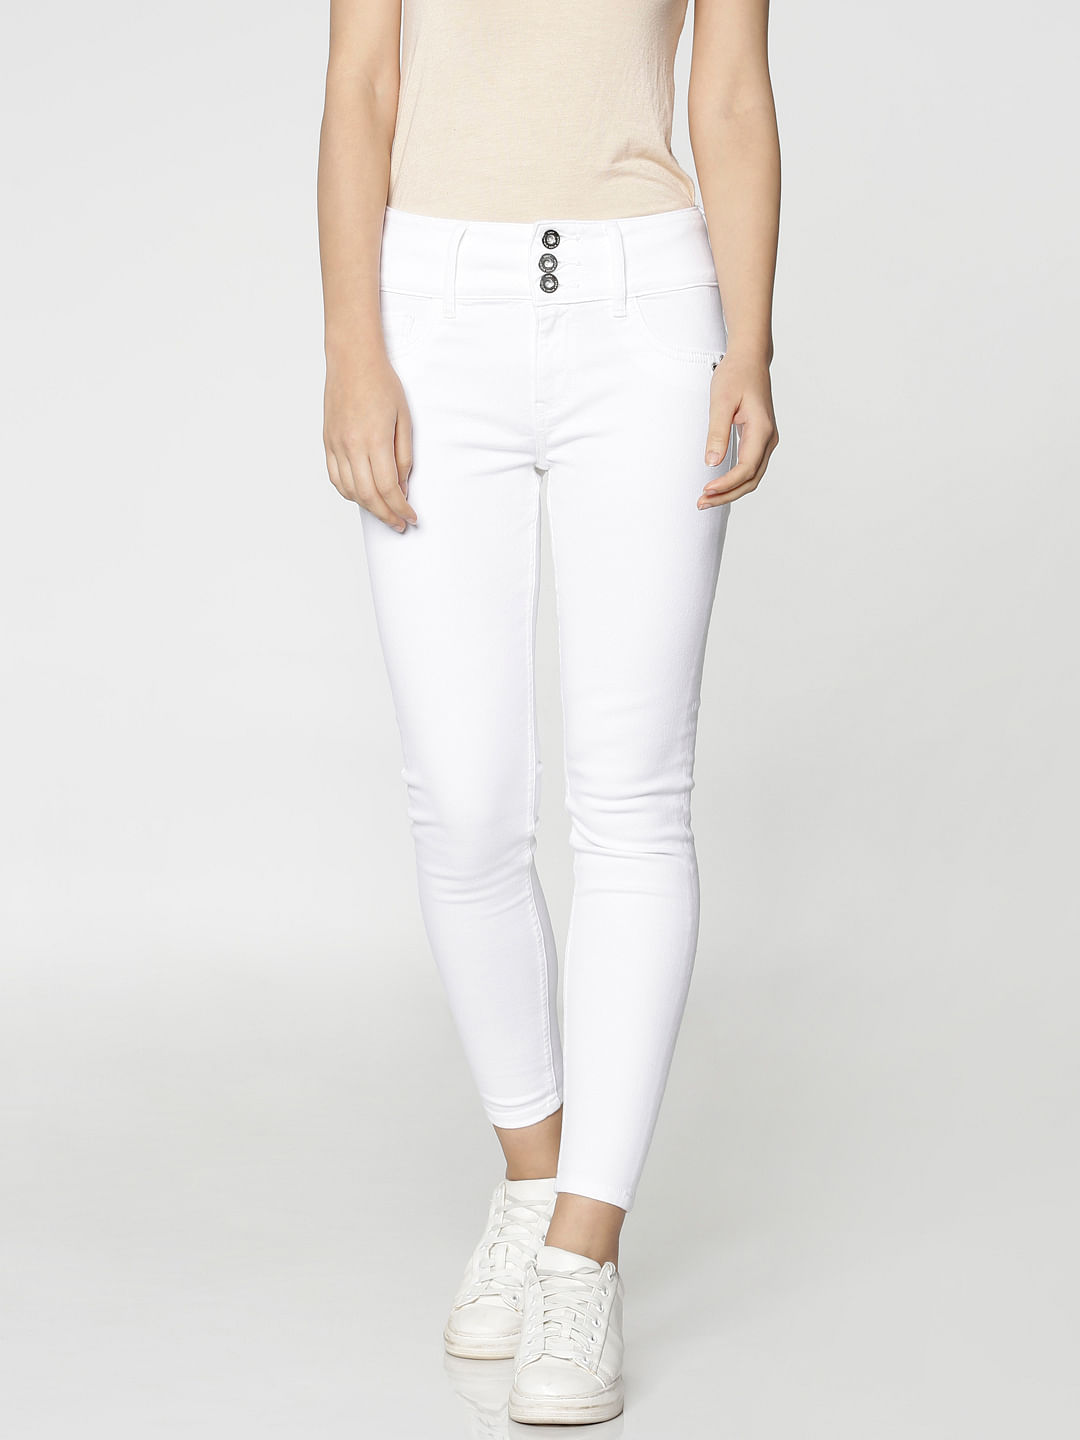 white ankle jeans